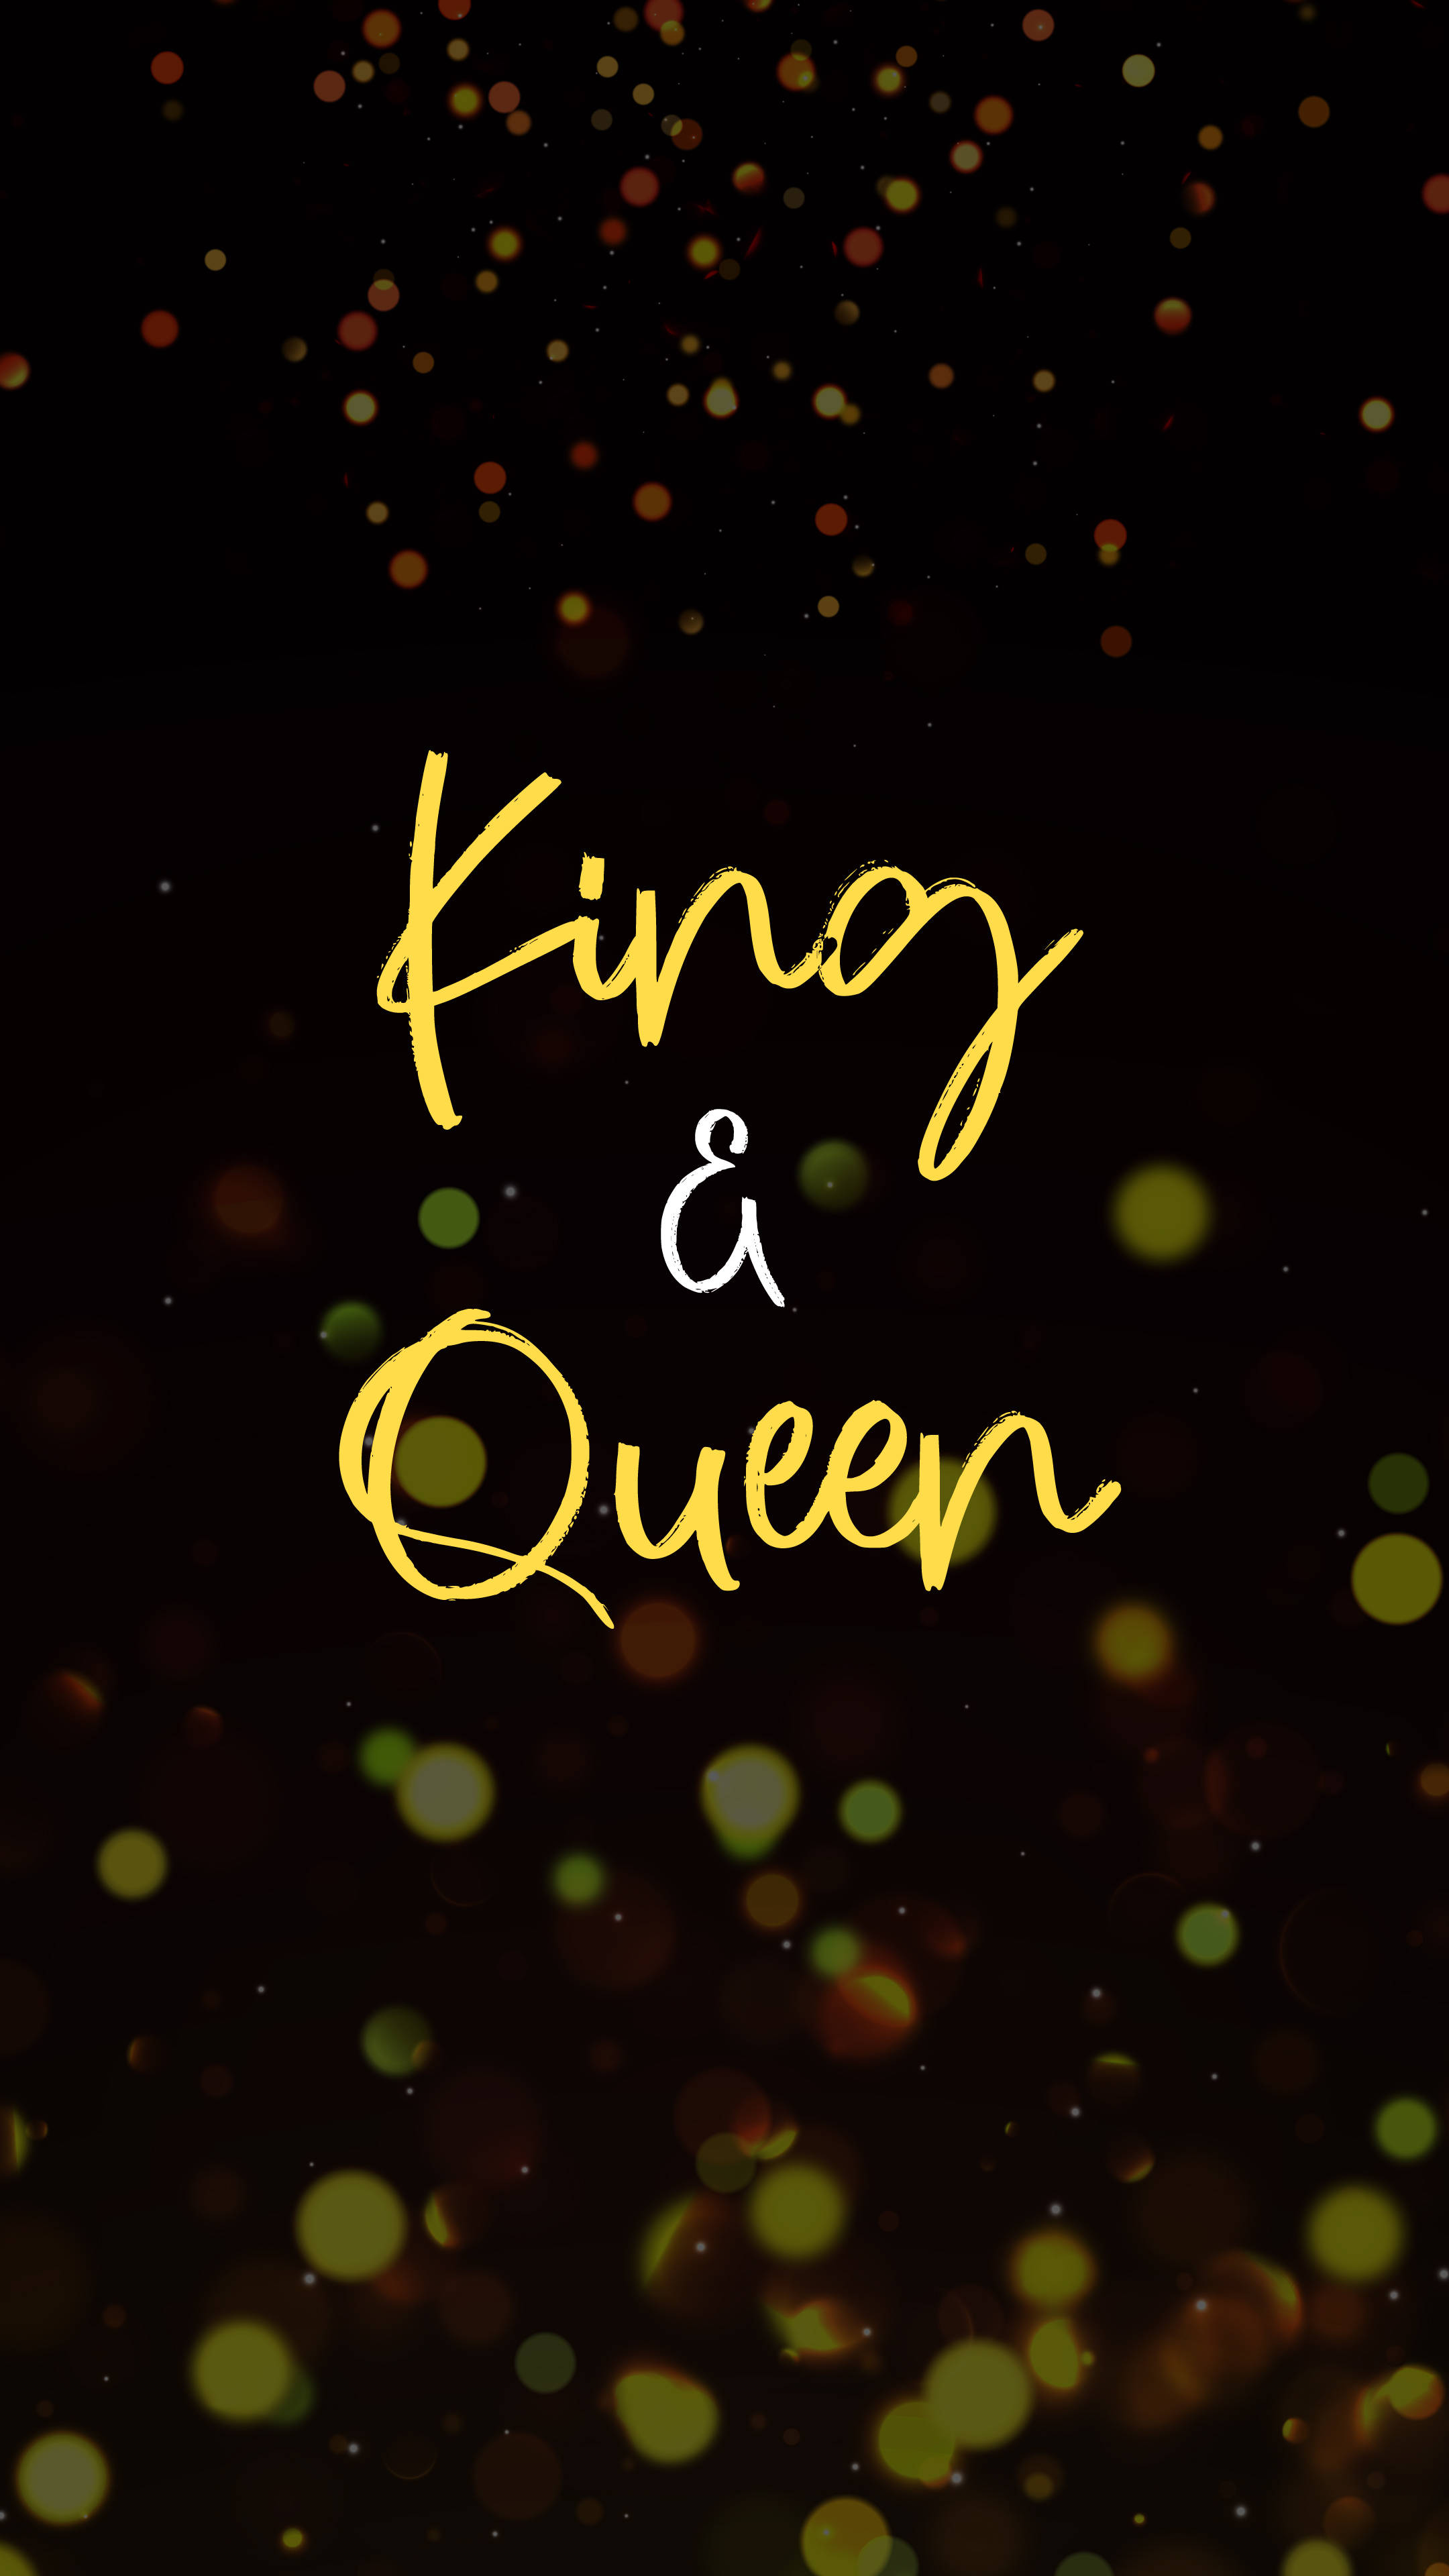 Free King Wallpaper Downloads, [200+] King Wallpapers for FREE | Wallpapers .com